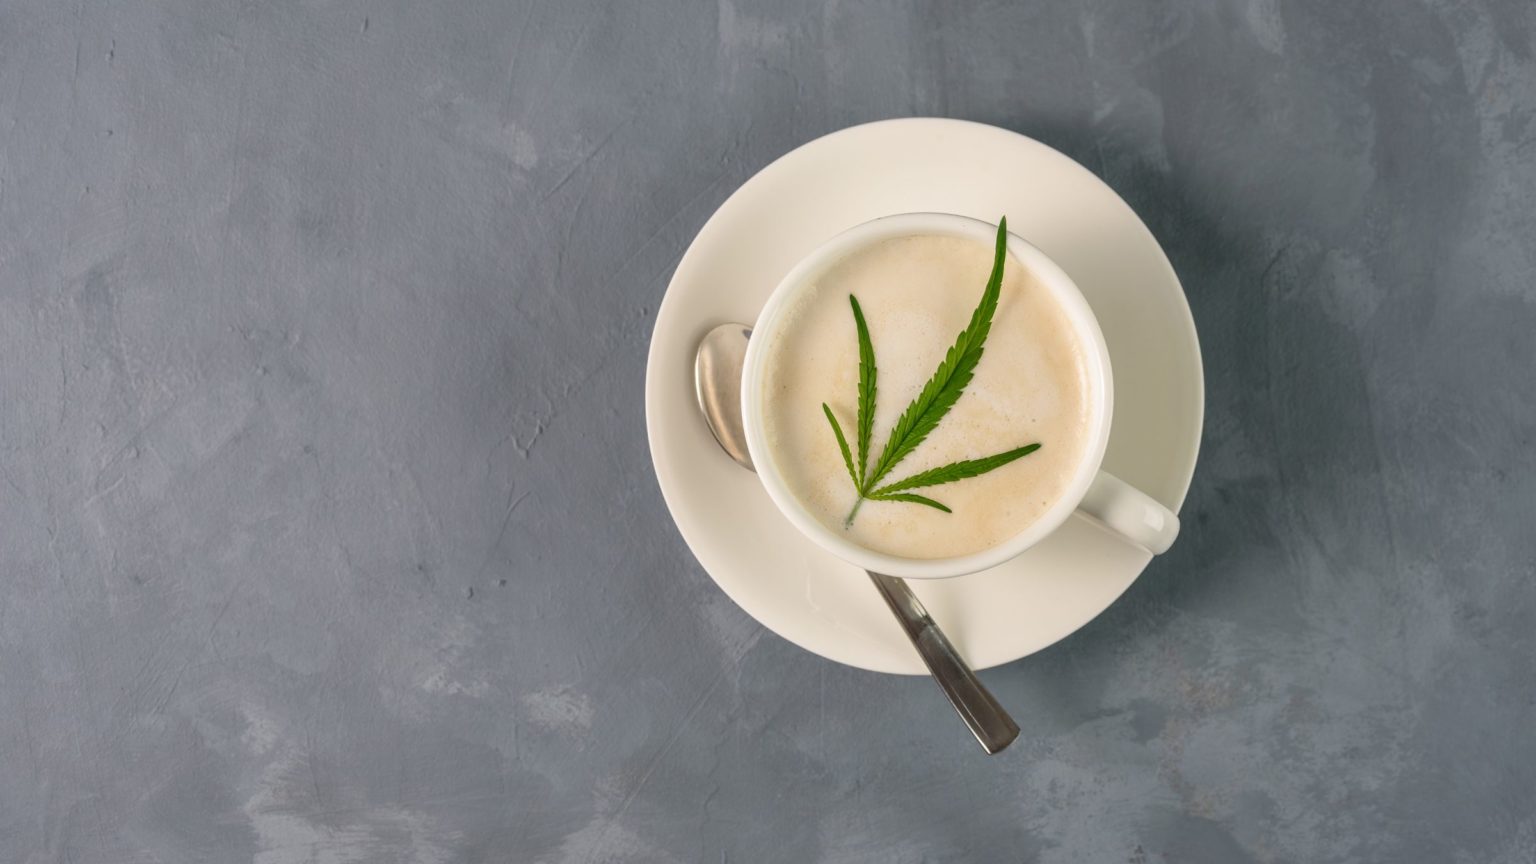 Are Weed Beverages The Future of Cannabis Use?